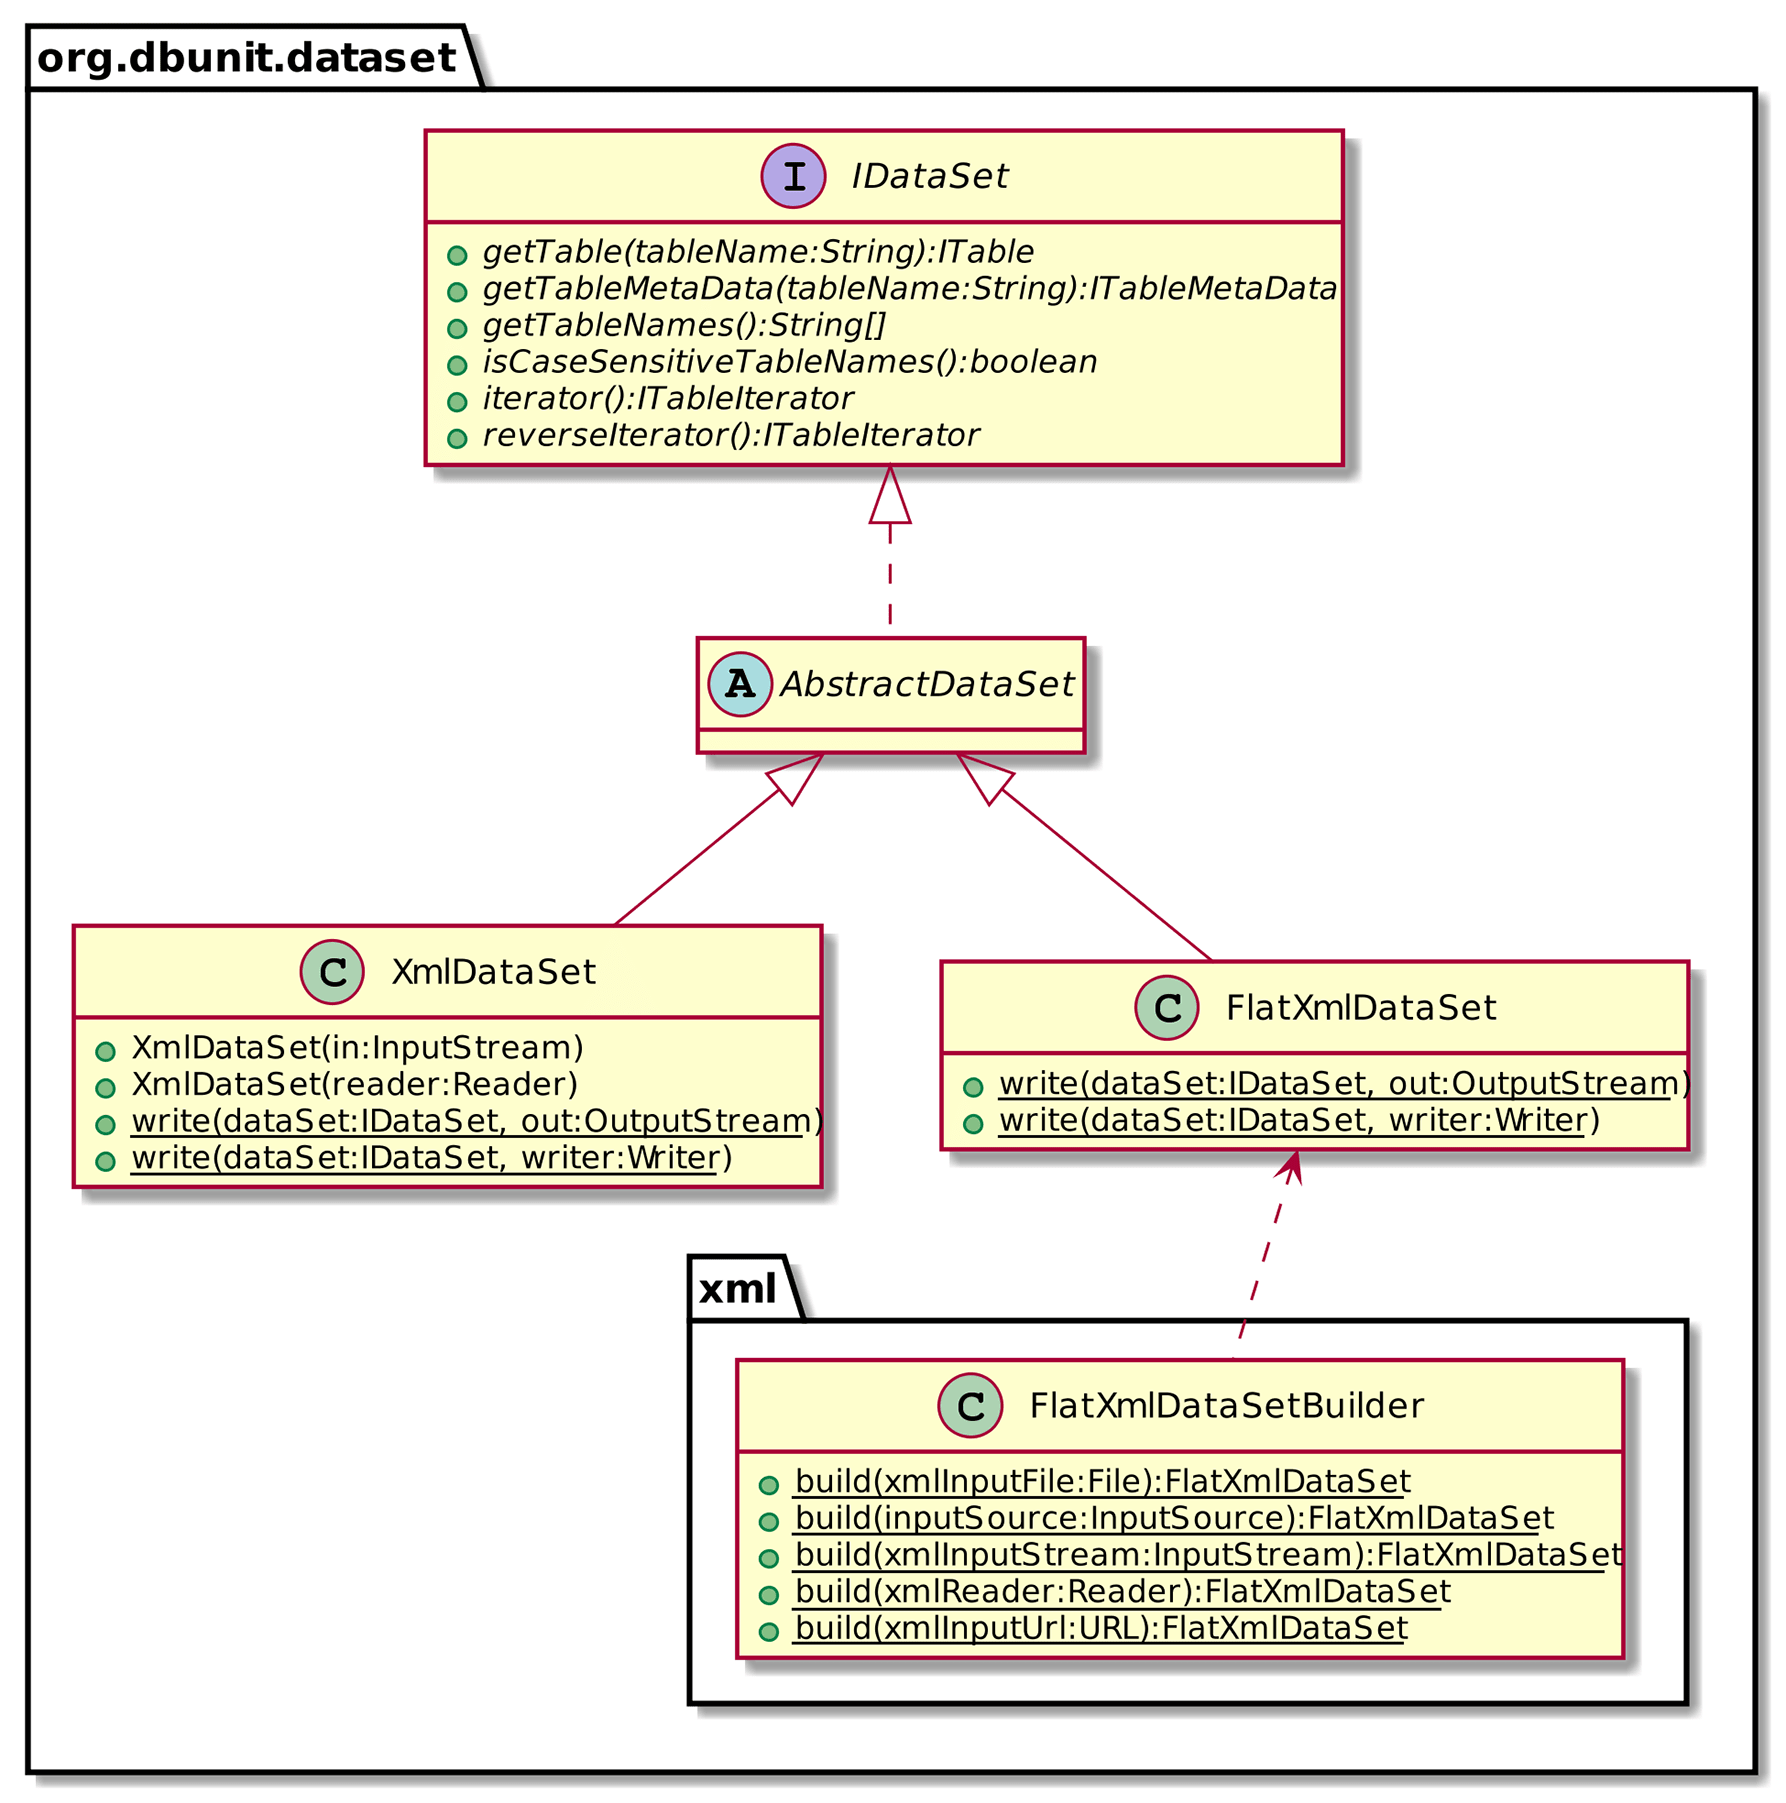 Fig. 5.5 - Dataset class hierarchy